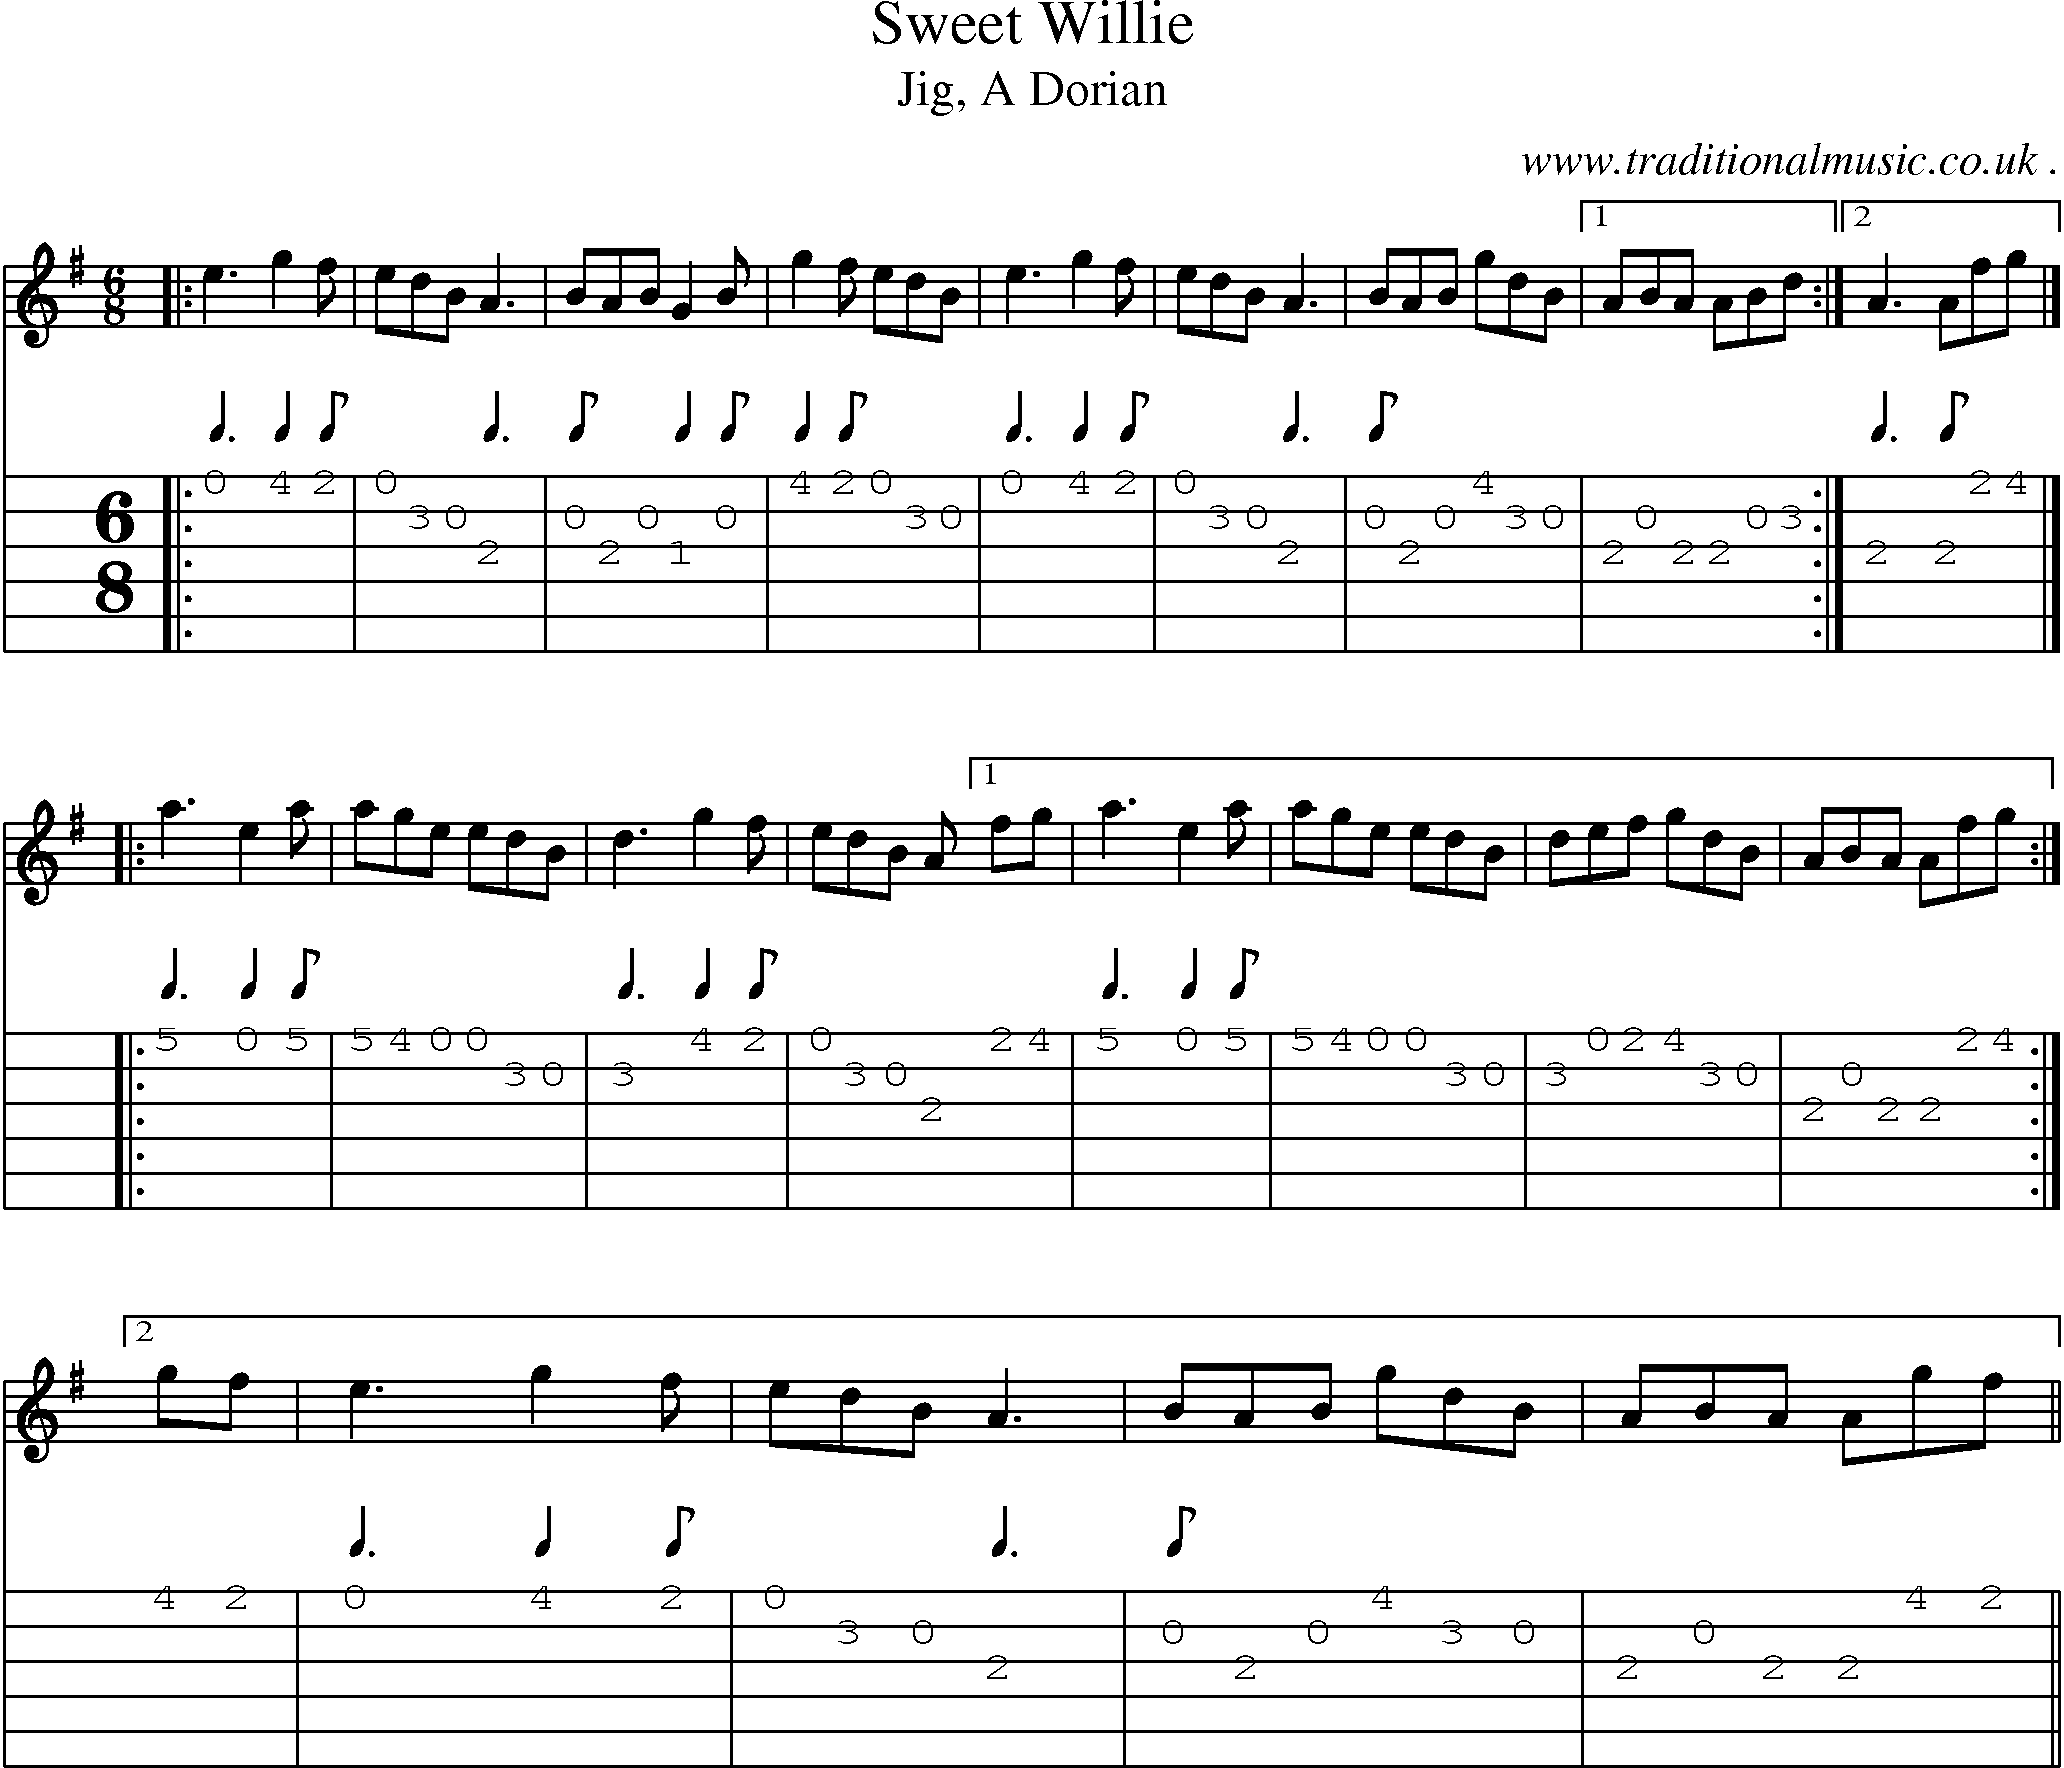 Sheet-music  score, Chords and Guitar Tabs for Sweet Willie